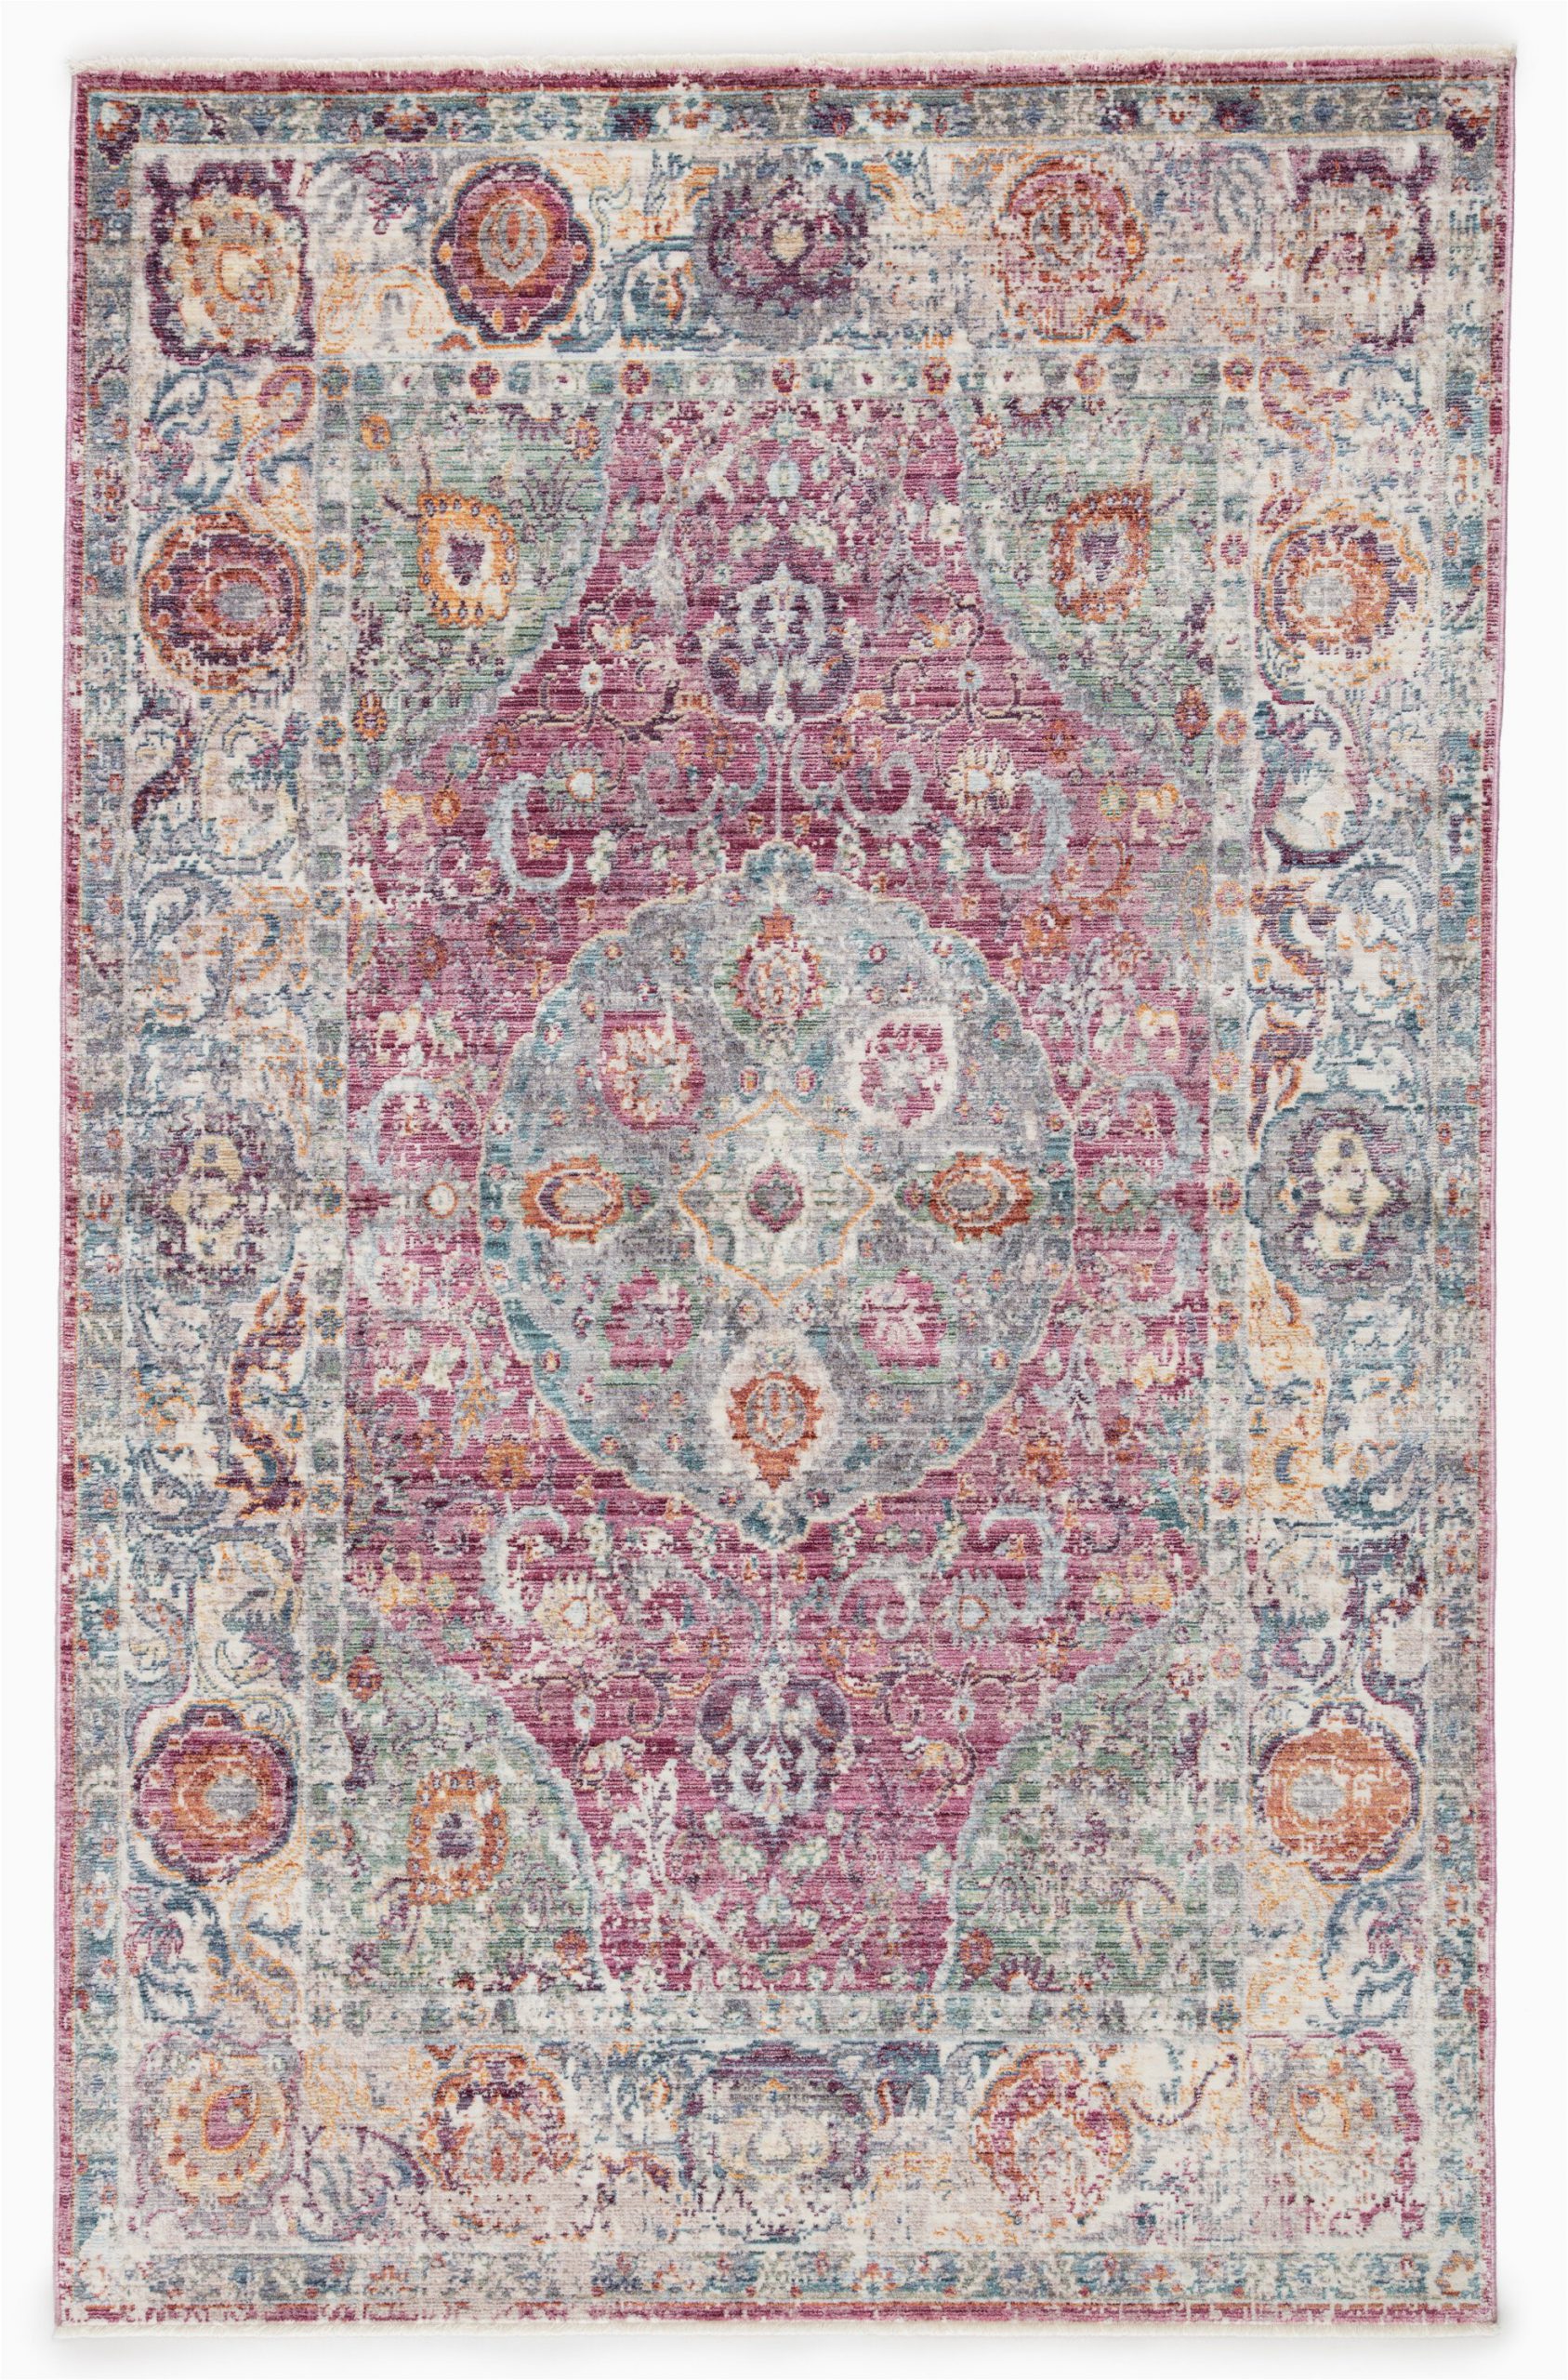 patchen lily whitedesert rose area rug